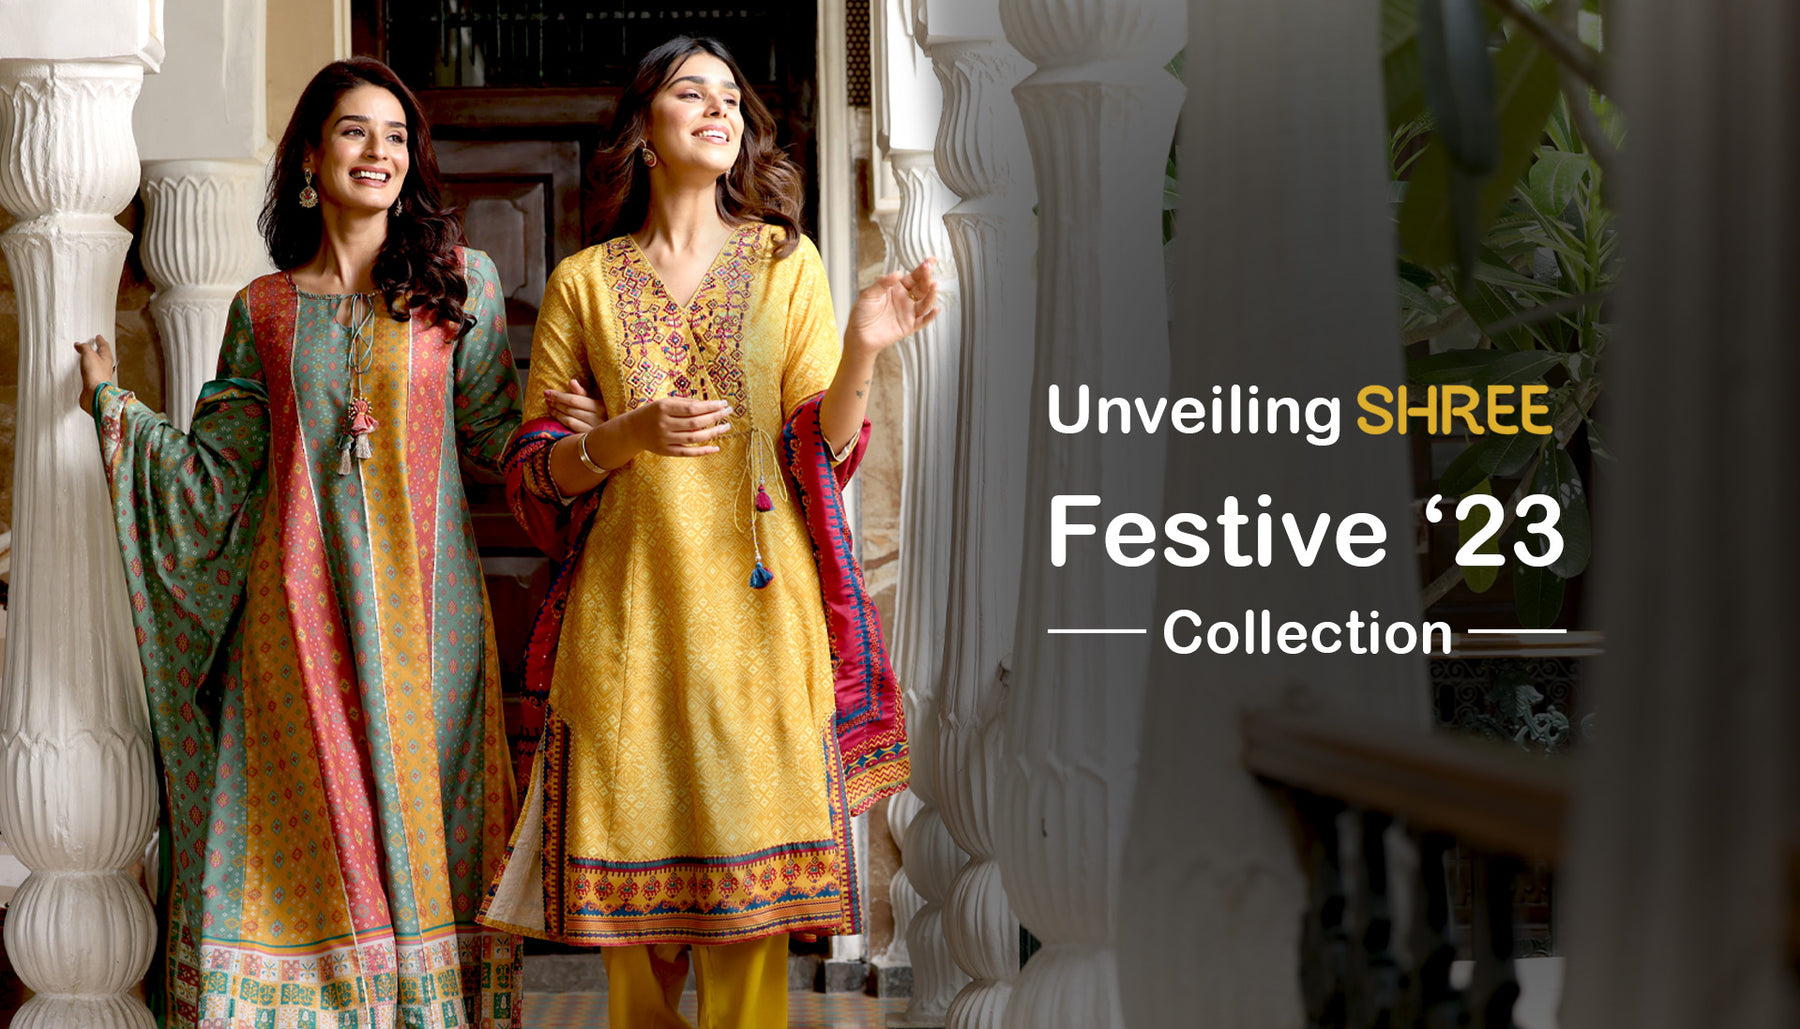 Unveiling SHREE's Festive ’23 Collection